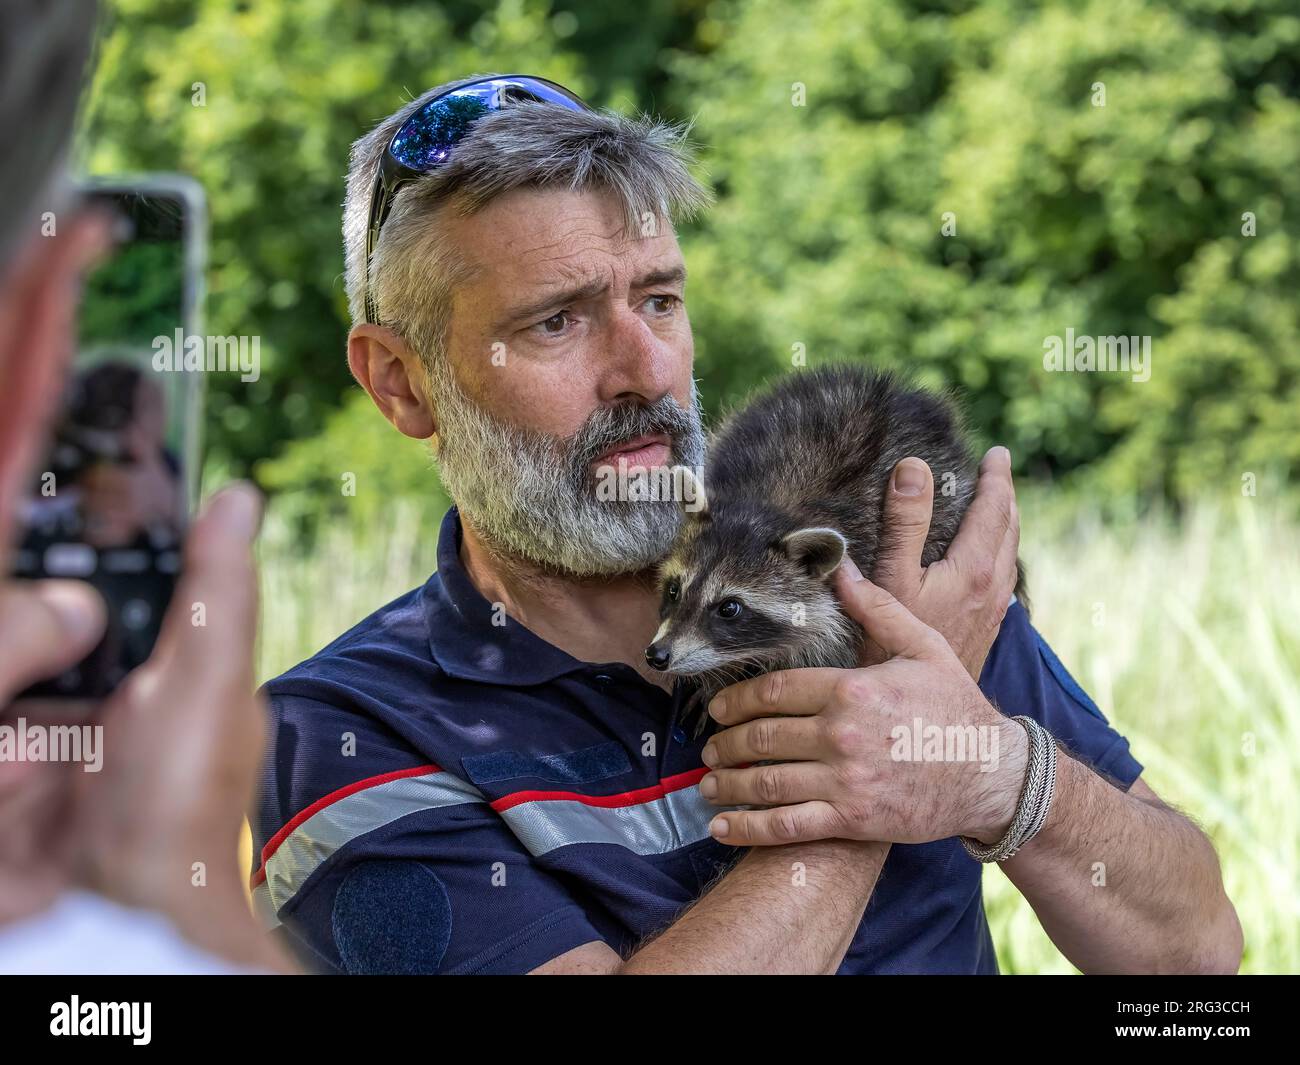 Cub Northern Raccoon (Procyon lotor) on a rescue by firemen in Rouge-Cloître, Auderghem, Brussels, Brabant, Belgium. Stock Photo